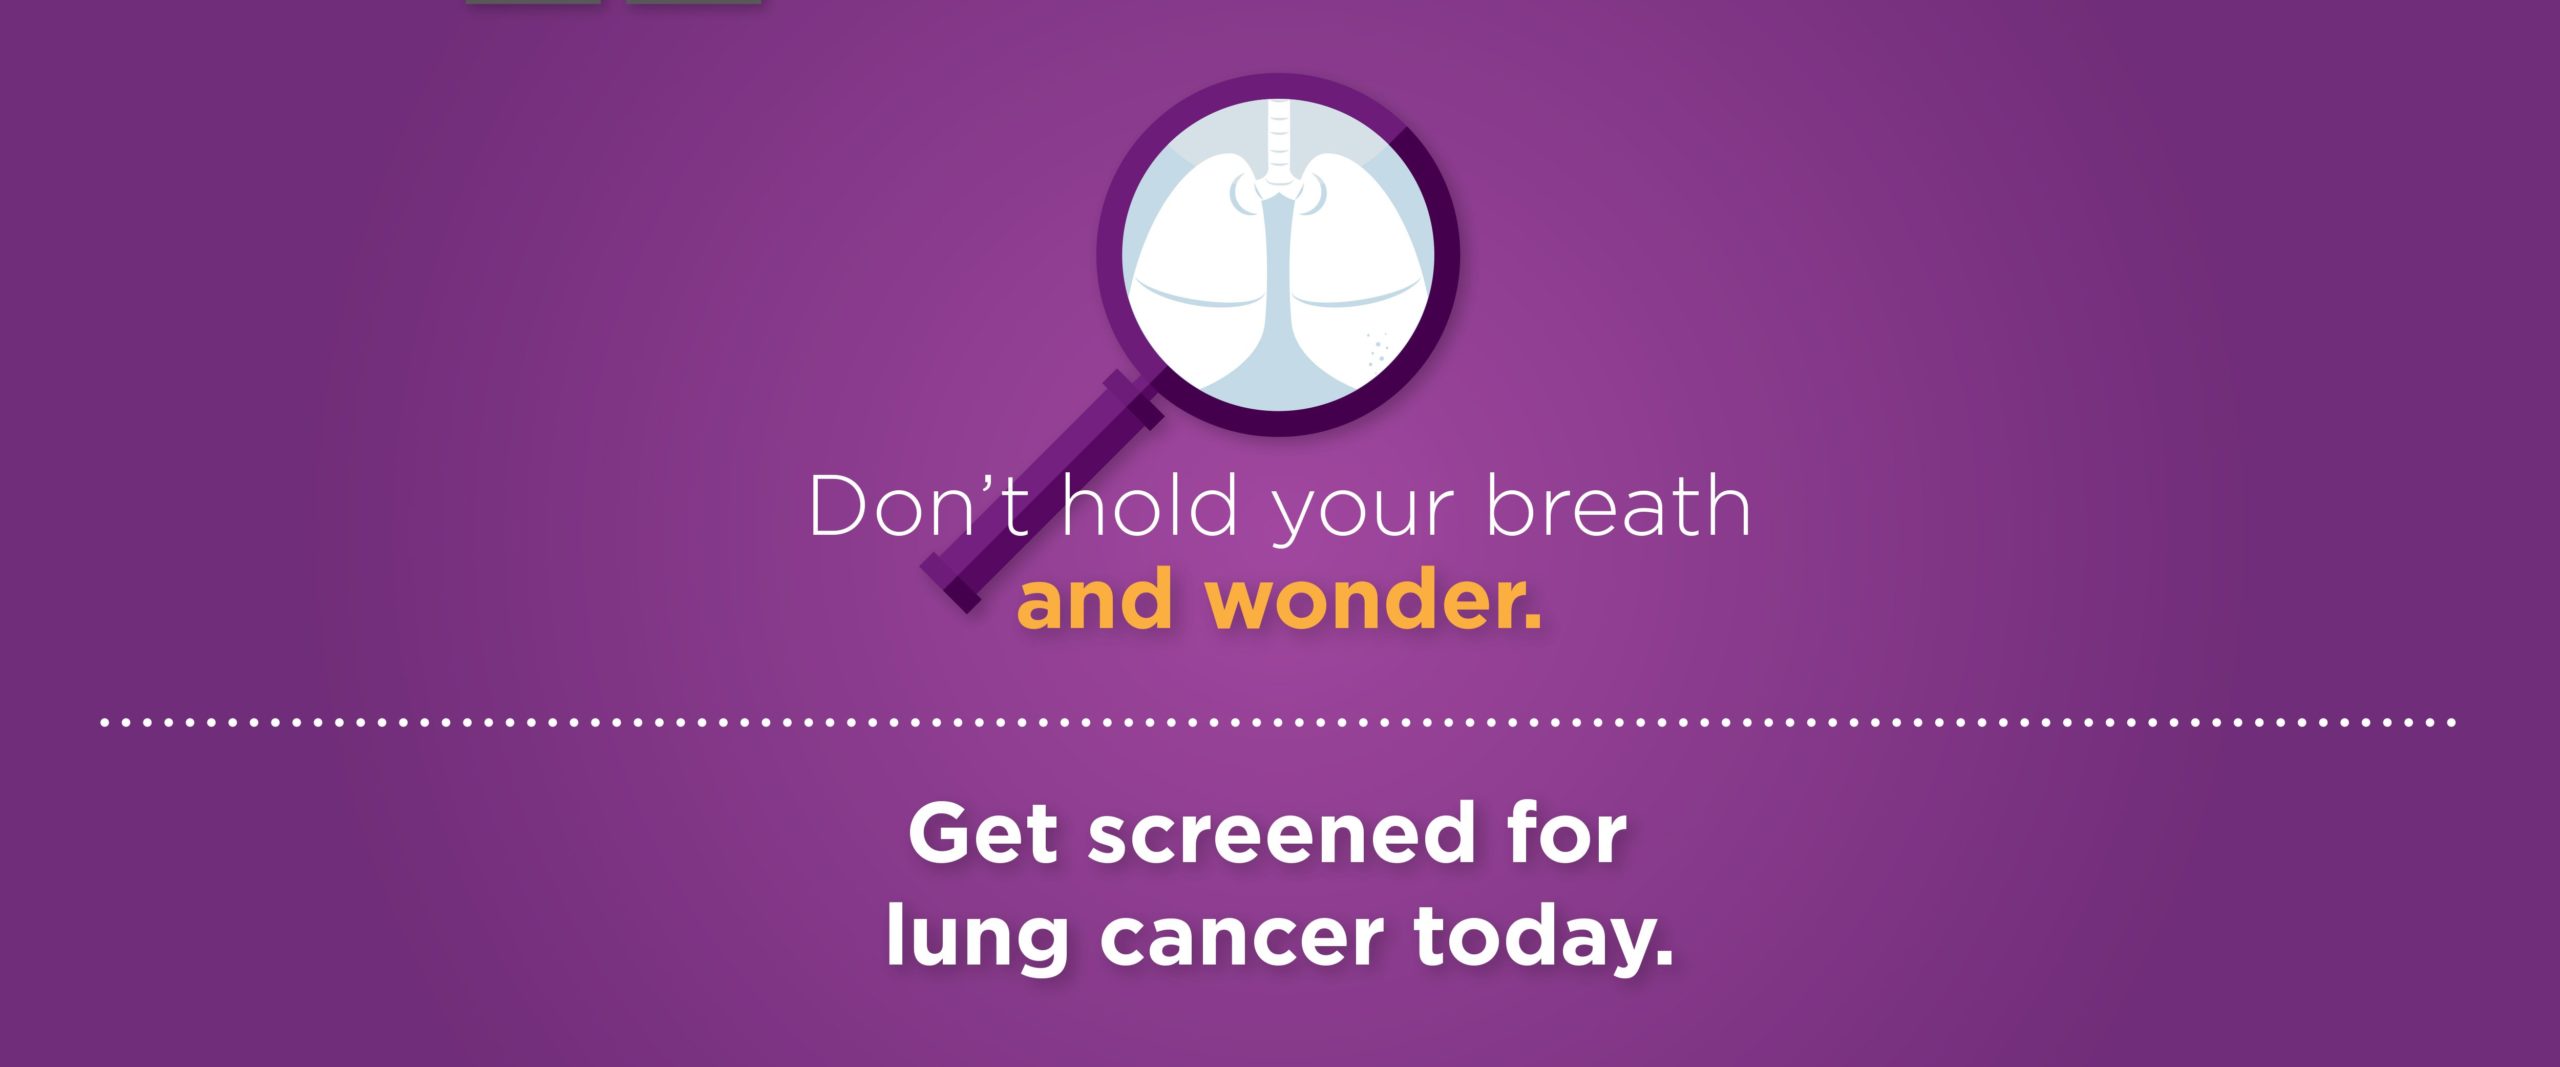 Don't hold your breath and wonder., Ge screened for lung cancer today